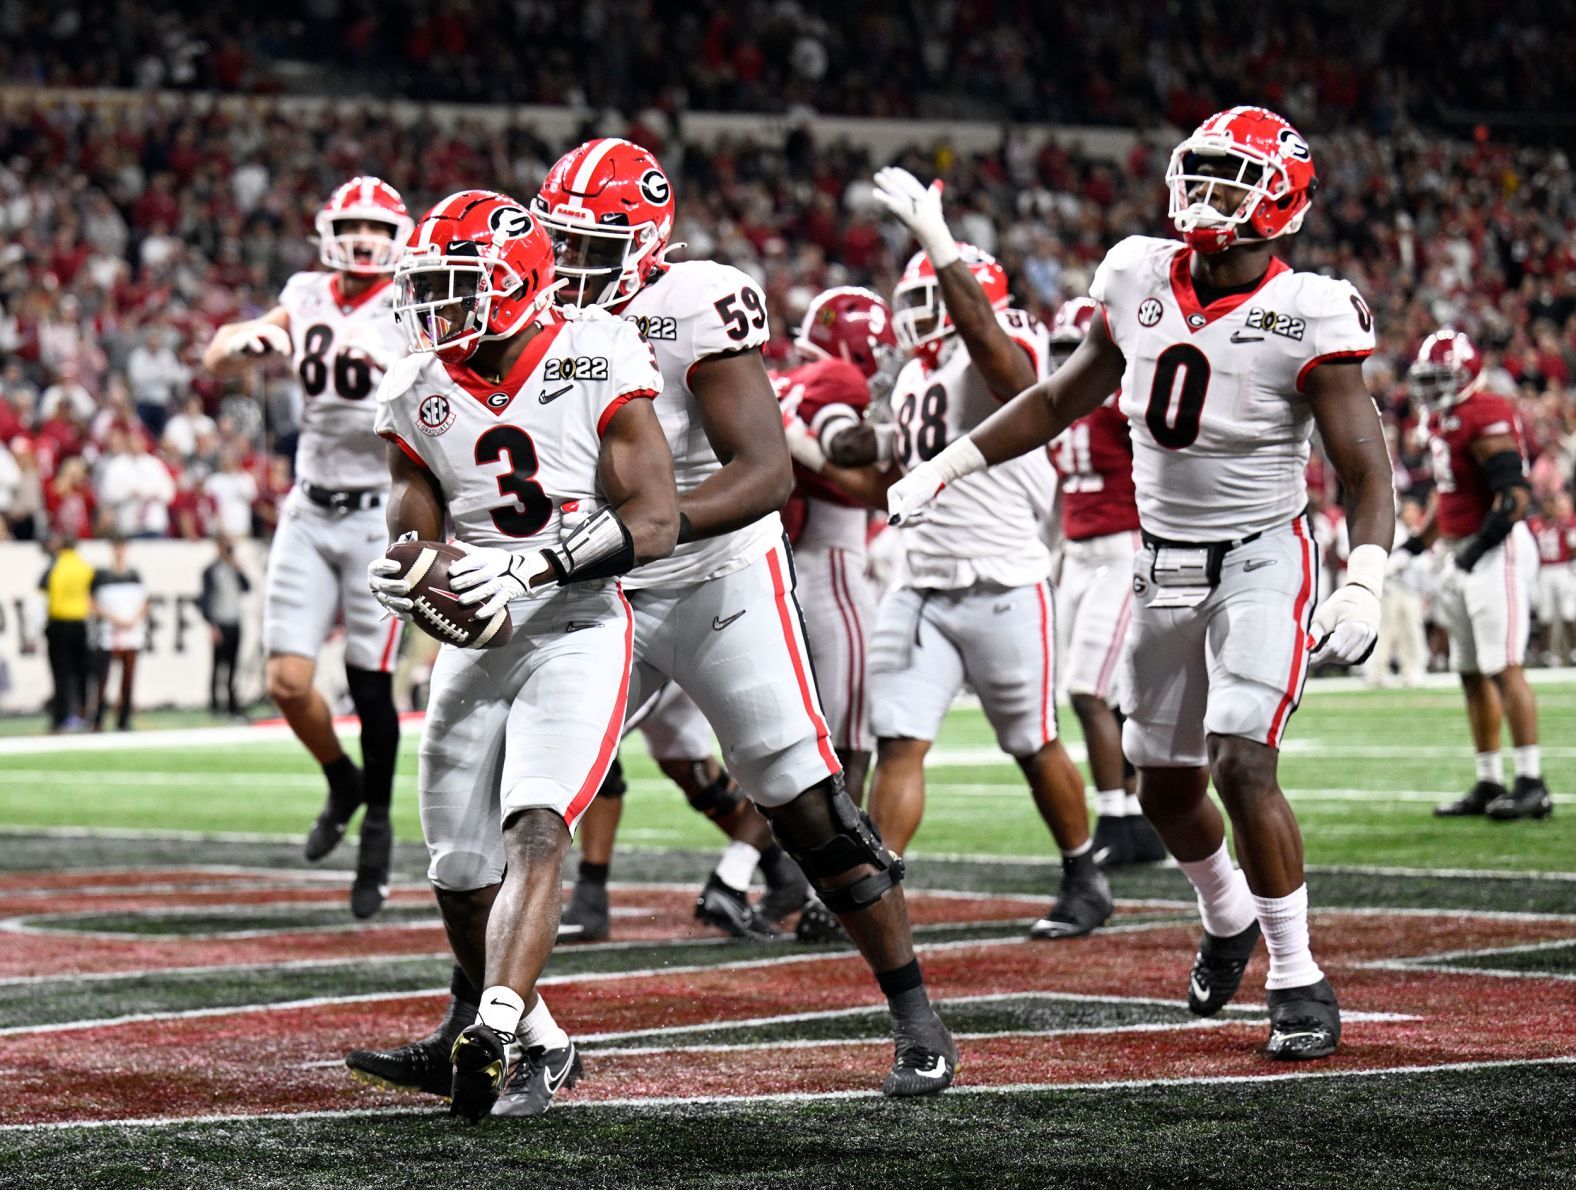 Georgia running back Zamir White celebrates with his teammates after scoring on a 1-yard touchdown run late in the third quarter. After the extra point, Georgia led 13-9.